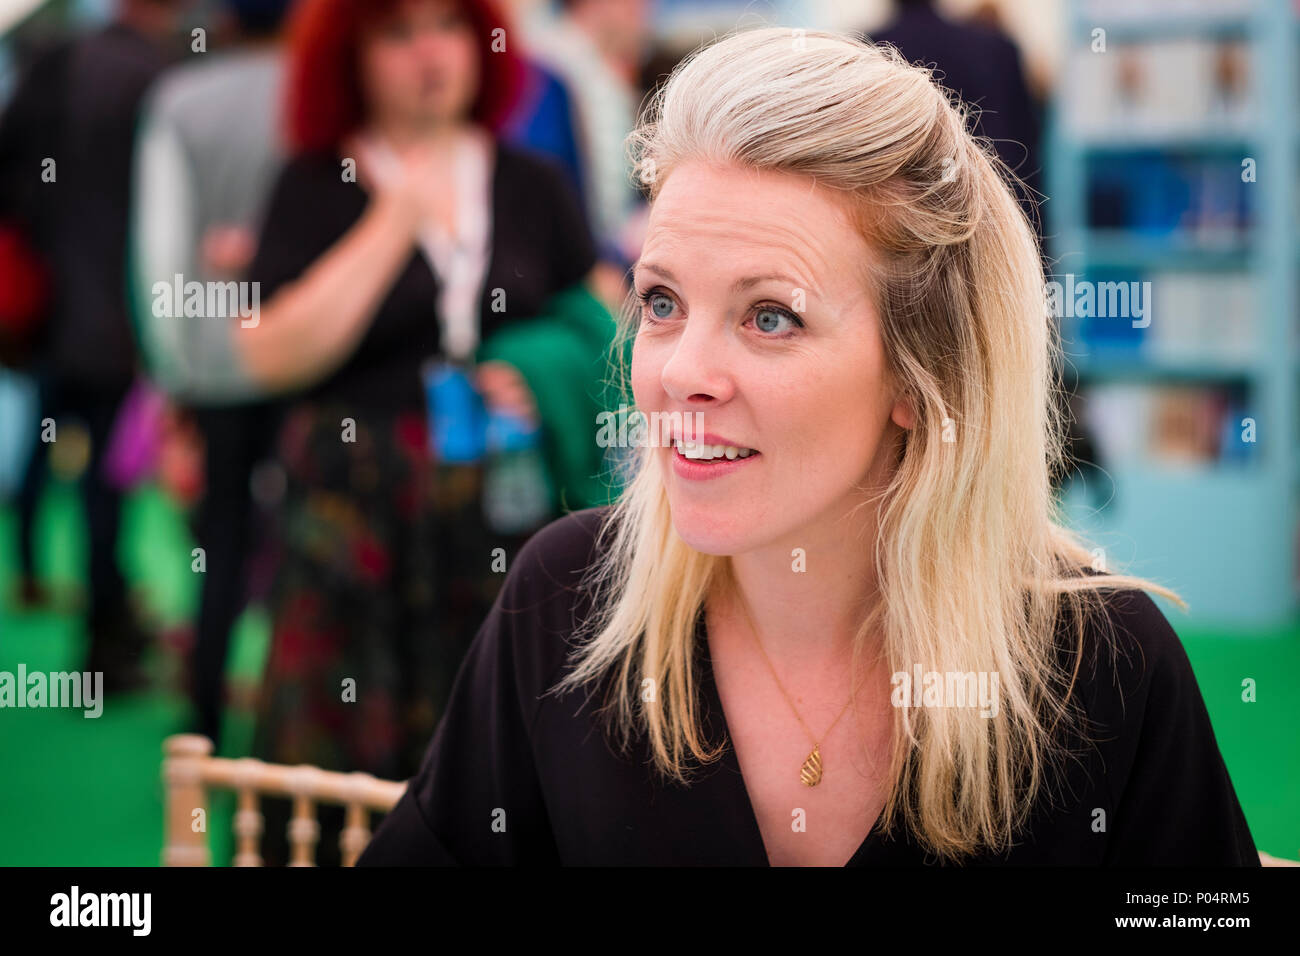 Sarah Crossan,  Irish author. Best known for her books for young adults, including Apple and Rain and One, for which she has won several awards.   At the Hay Festival  of Literature and the Arts, May 2018 Stock Photo